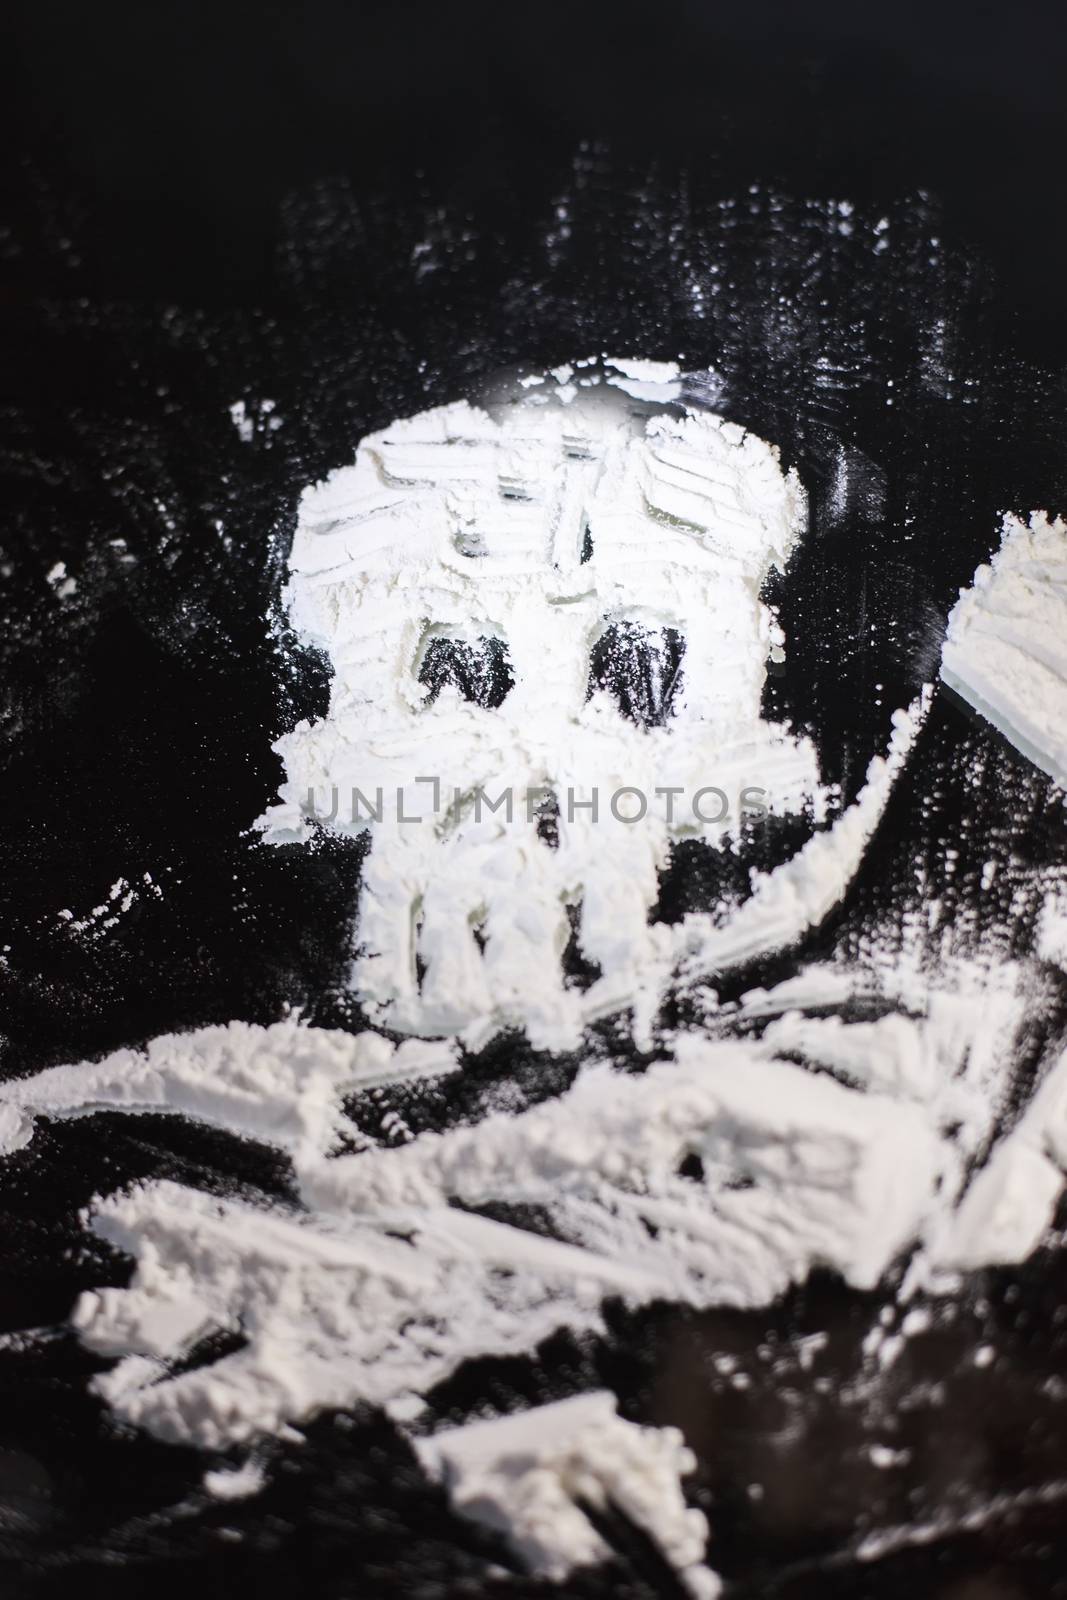 cocaine arranged in the shape of skull